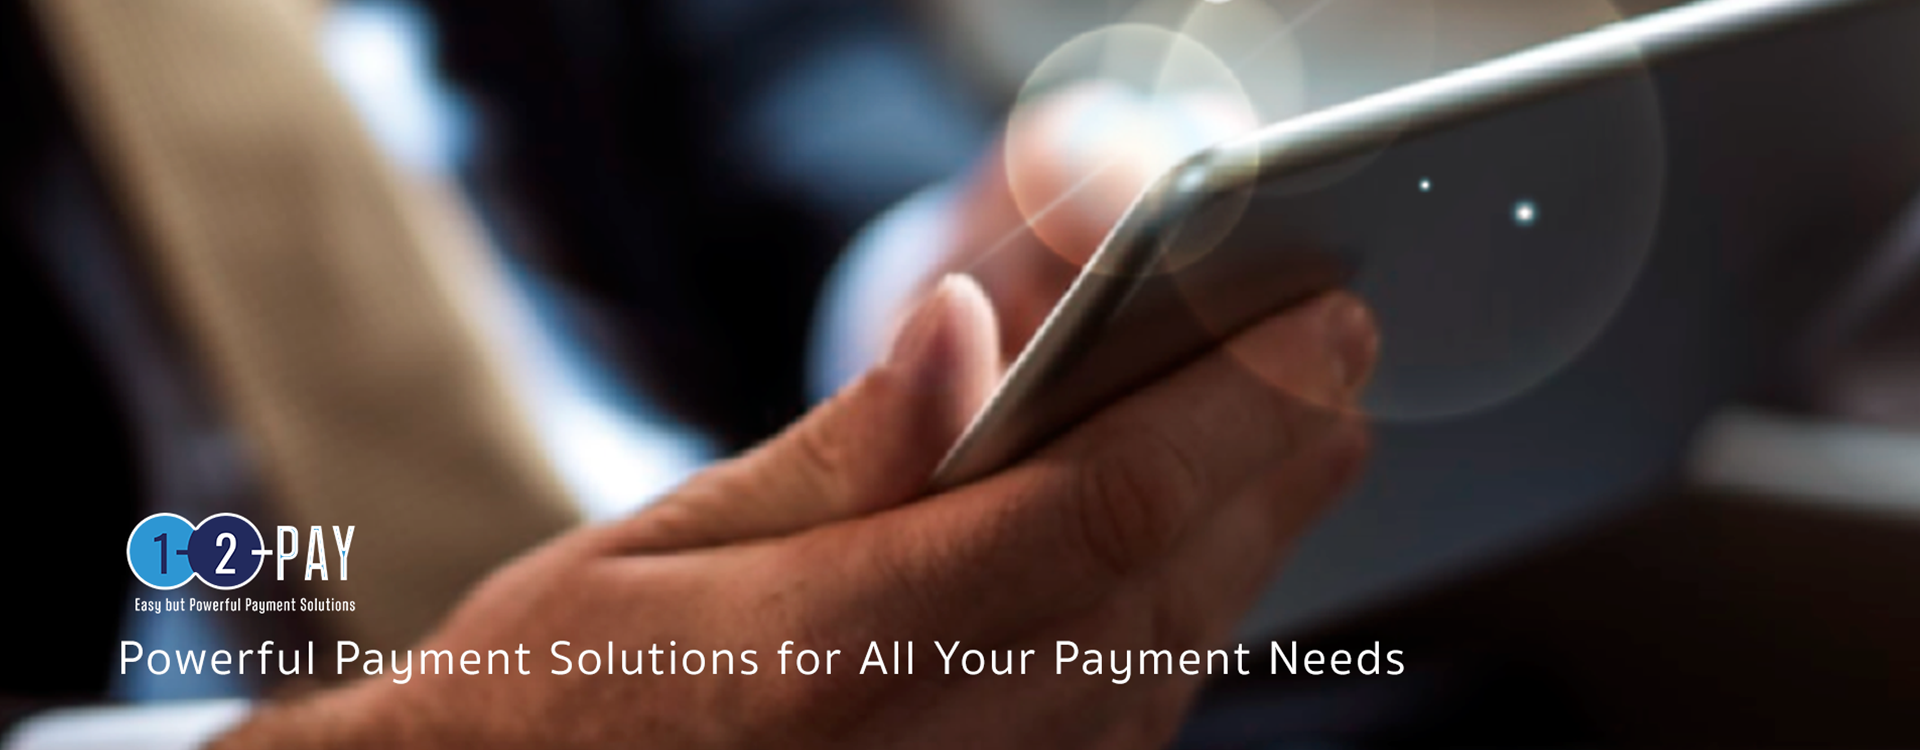 Powerful Payment Solutions for All Your Payment Needs